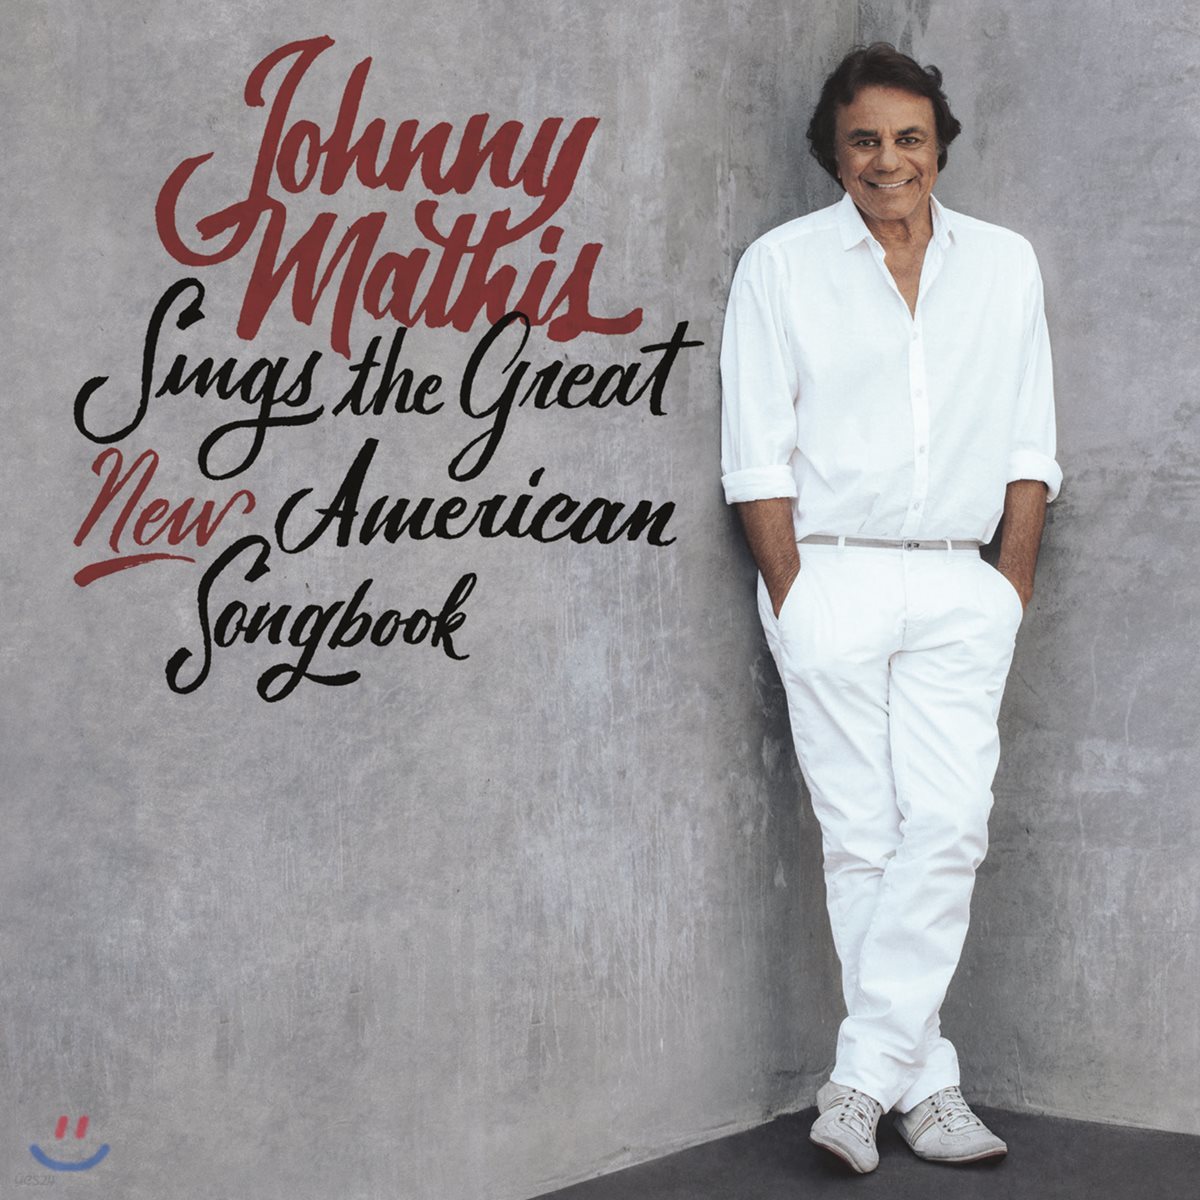 Johnny Mathis (조니 마티스) - Johnny Mathis Sings the Great New American Songbook